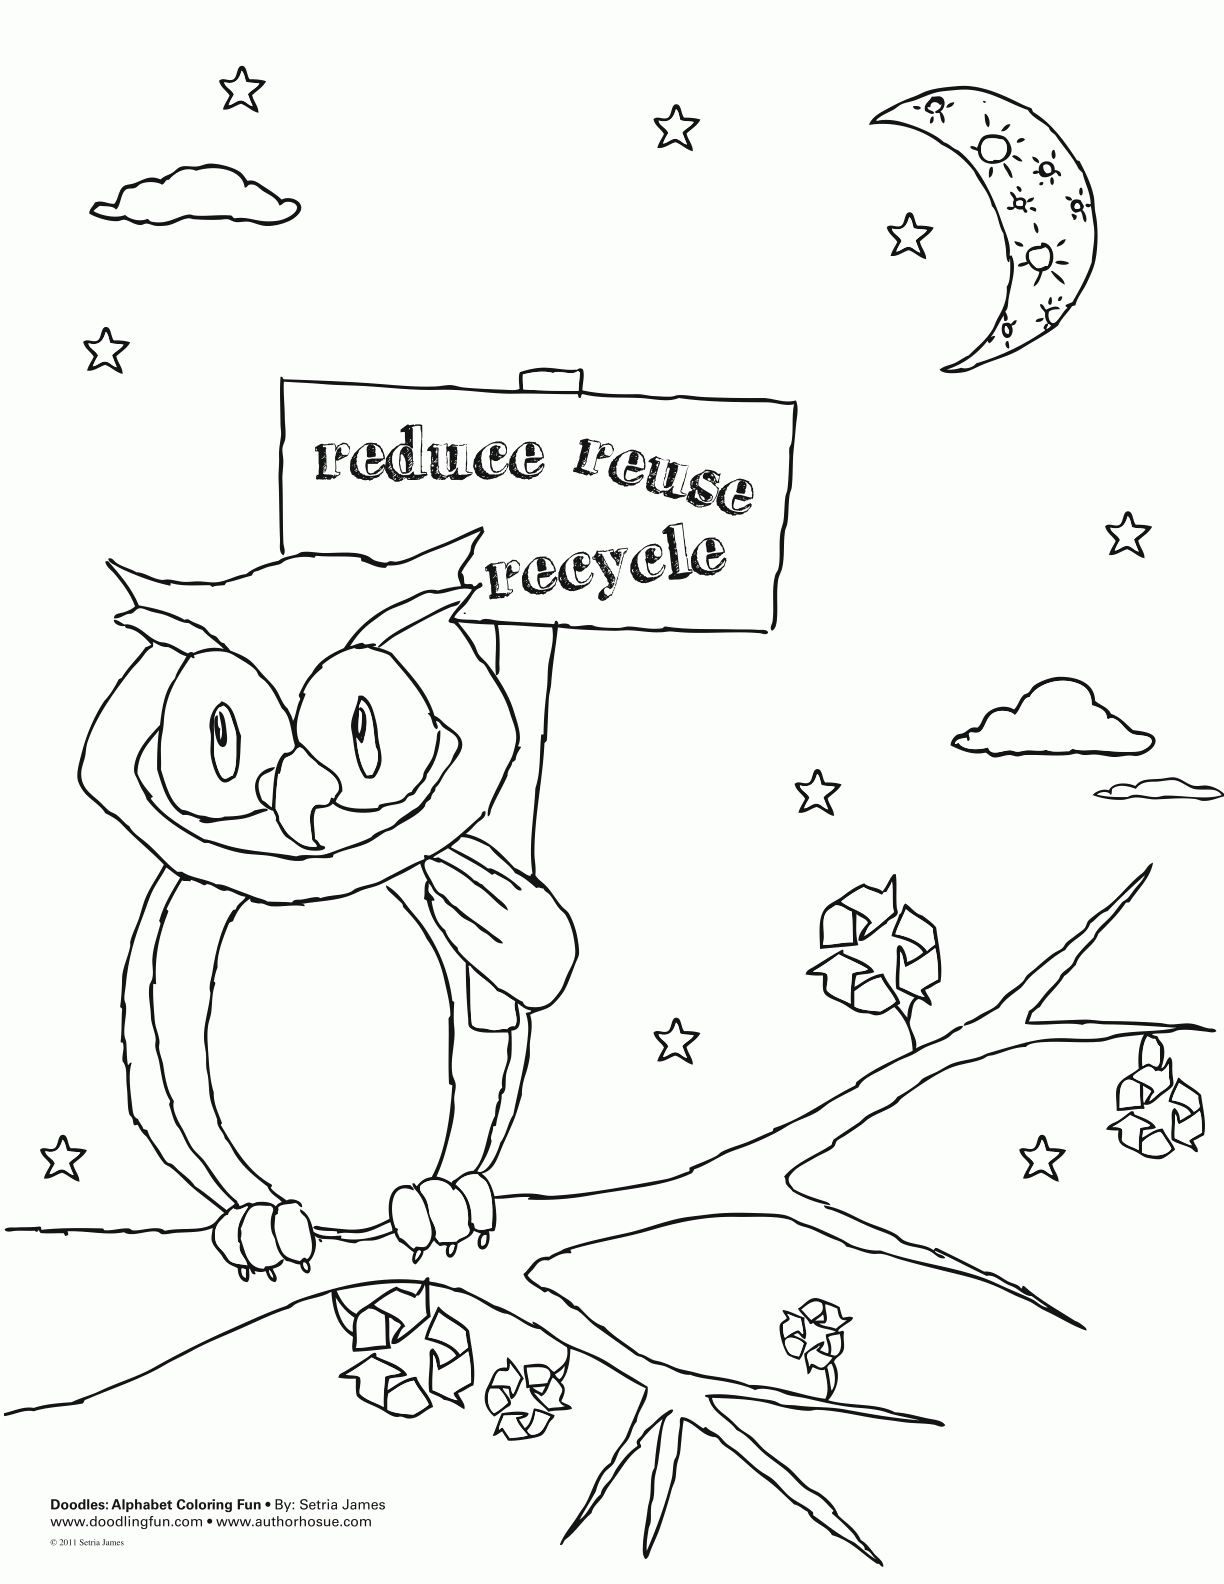 recycling coloring page recycle coloring pictures recycle coloring pages coloring coloring page recycling 